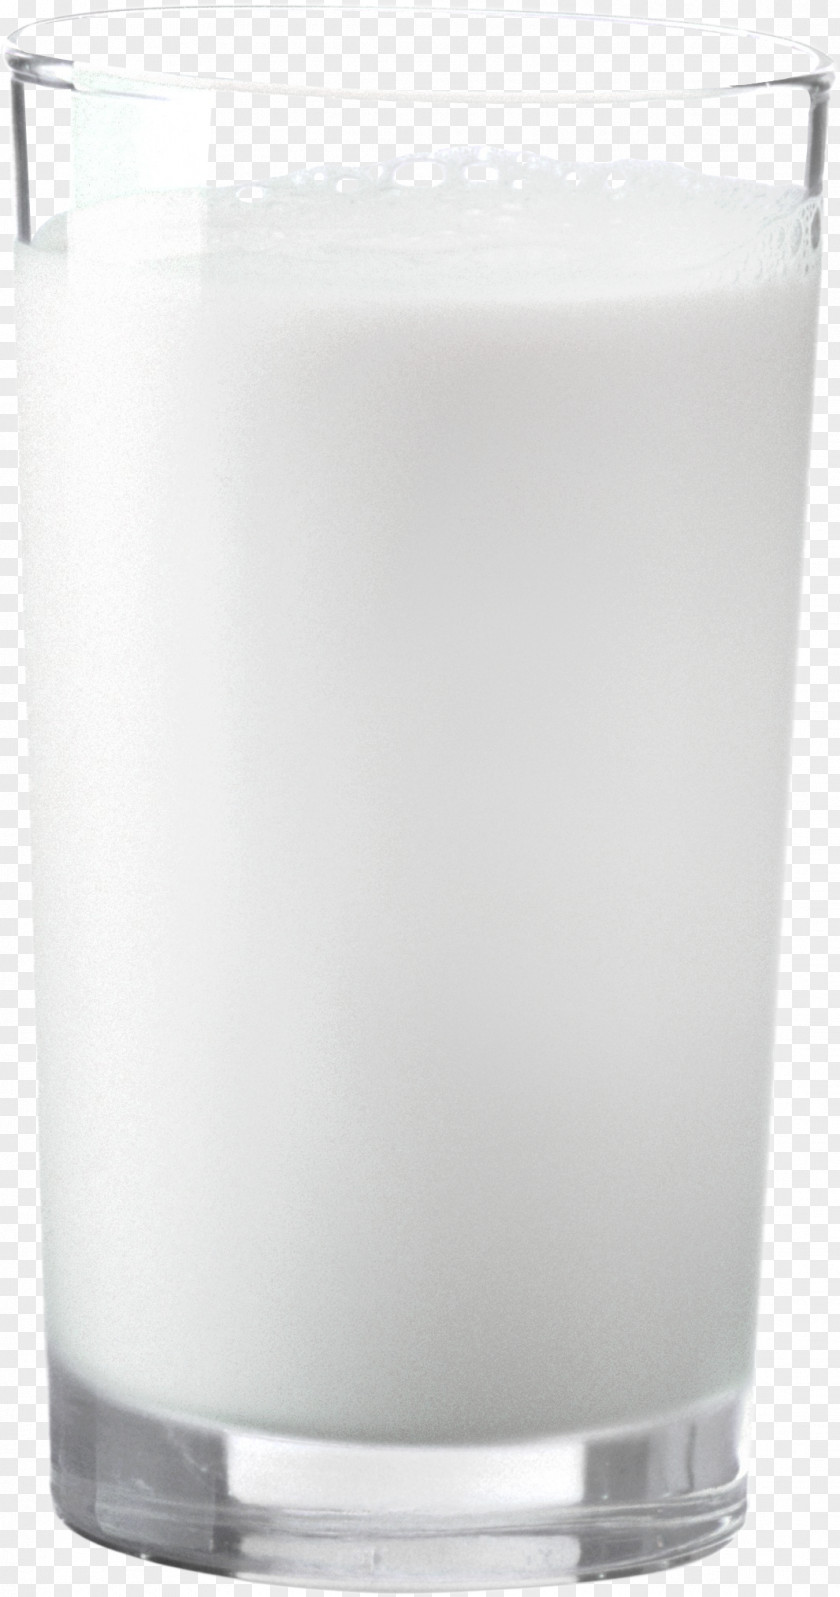 Milk Transparent Material Free To Pull Raw Cream Transparency And Translucency PNG